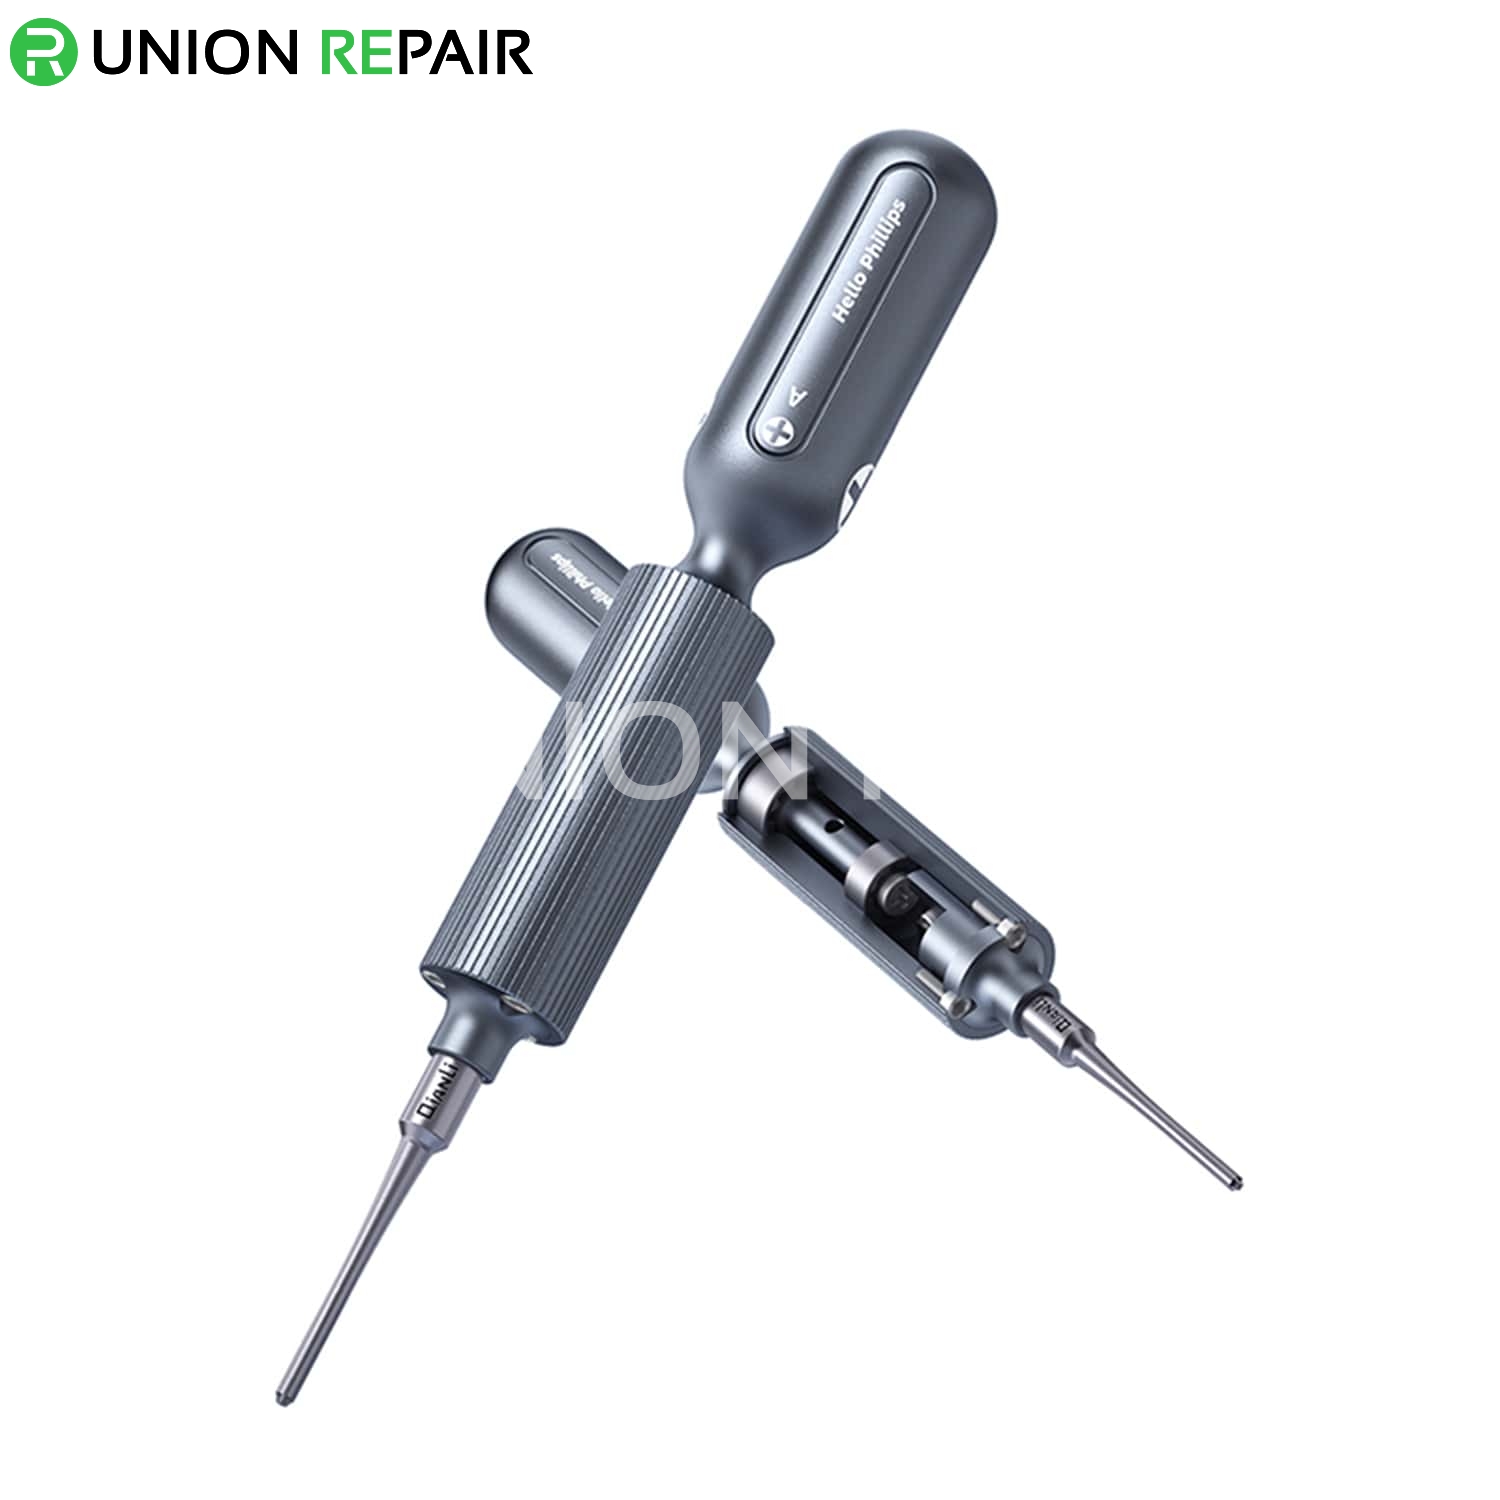 3D SCREW DRIVERS FOR iPhones Samsung And Huawei Phones 